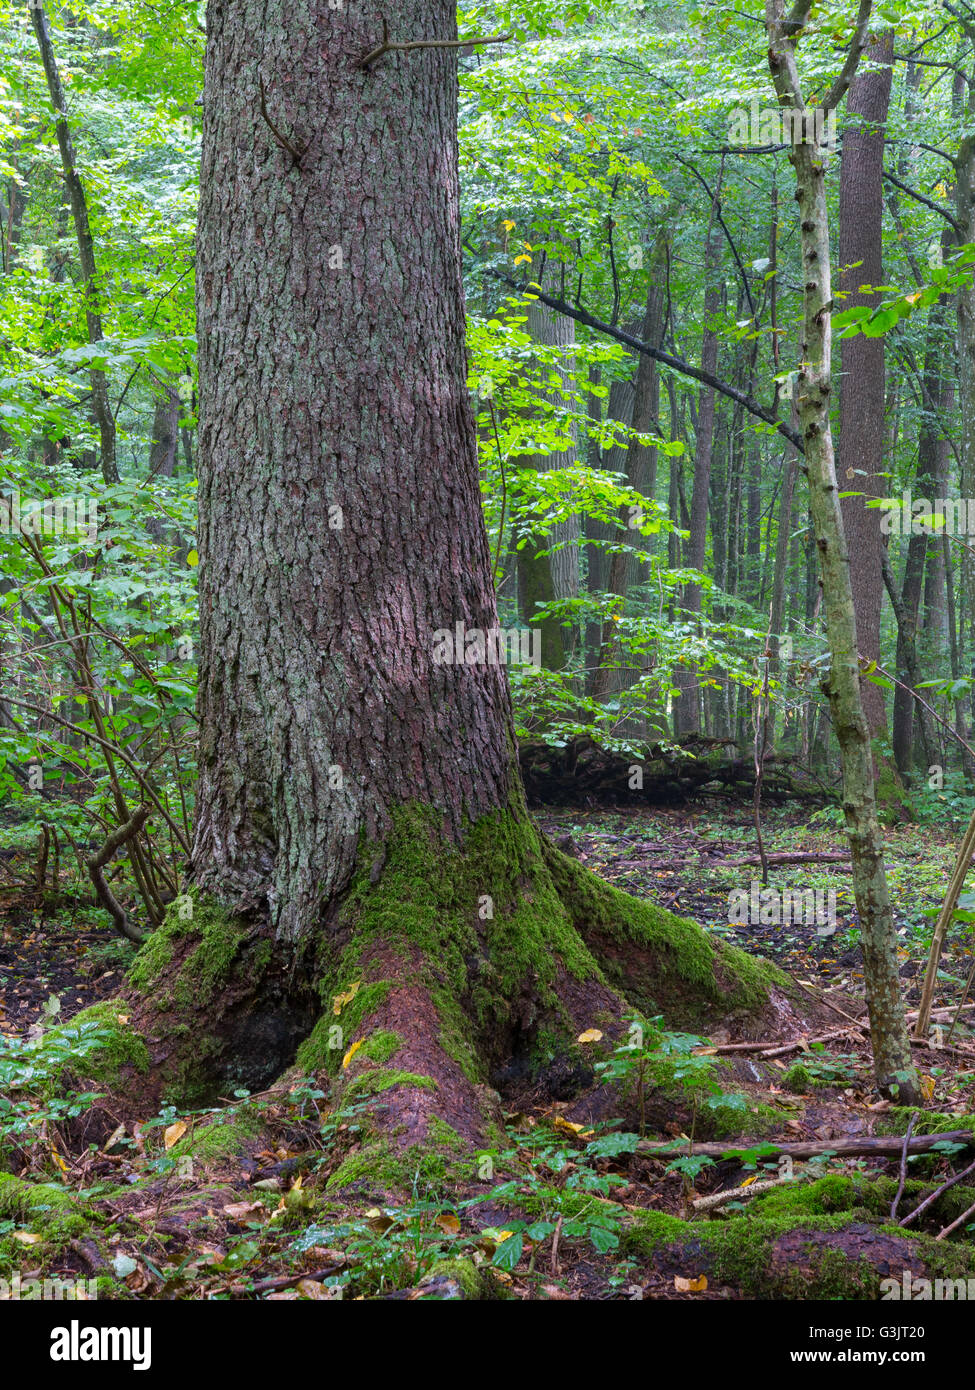 Old Norwegian Spruce(Picea abies) in foreground and old oak in background, Bialowieza Forest,Poland,Europe Stock Photo